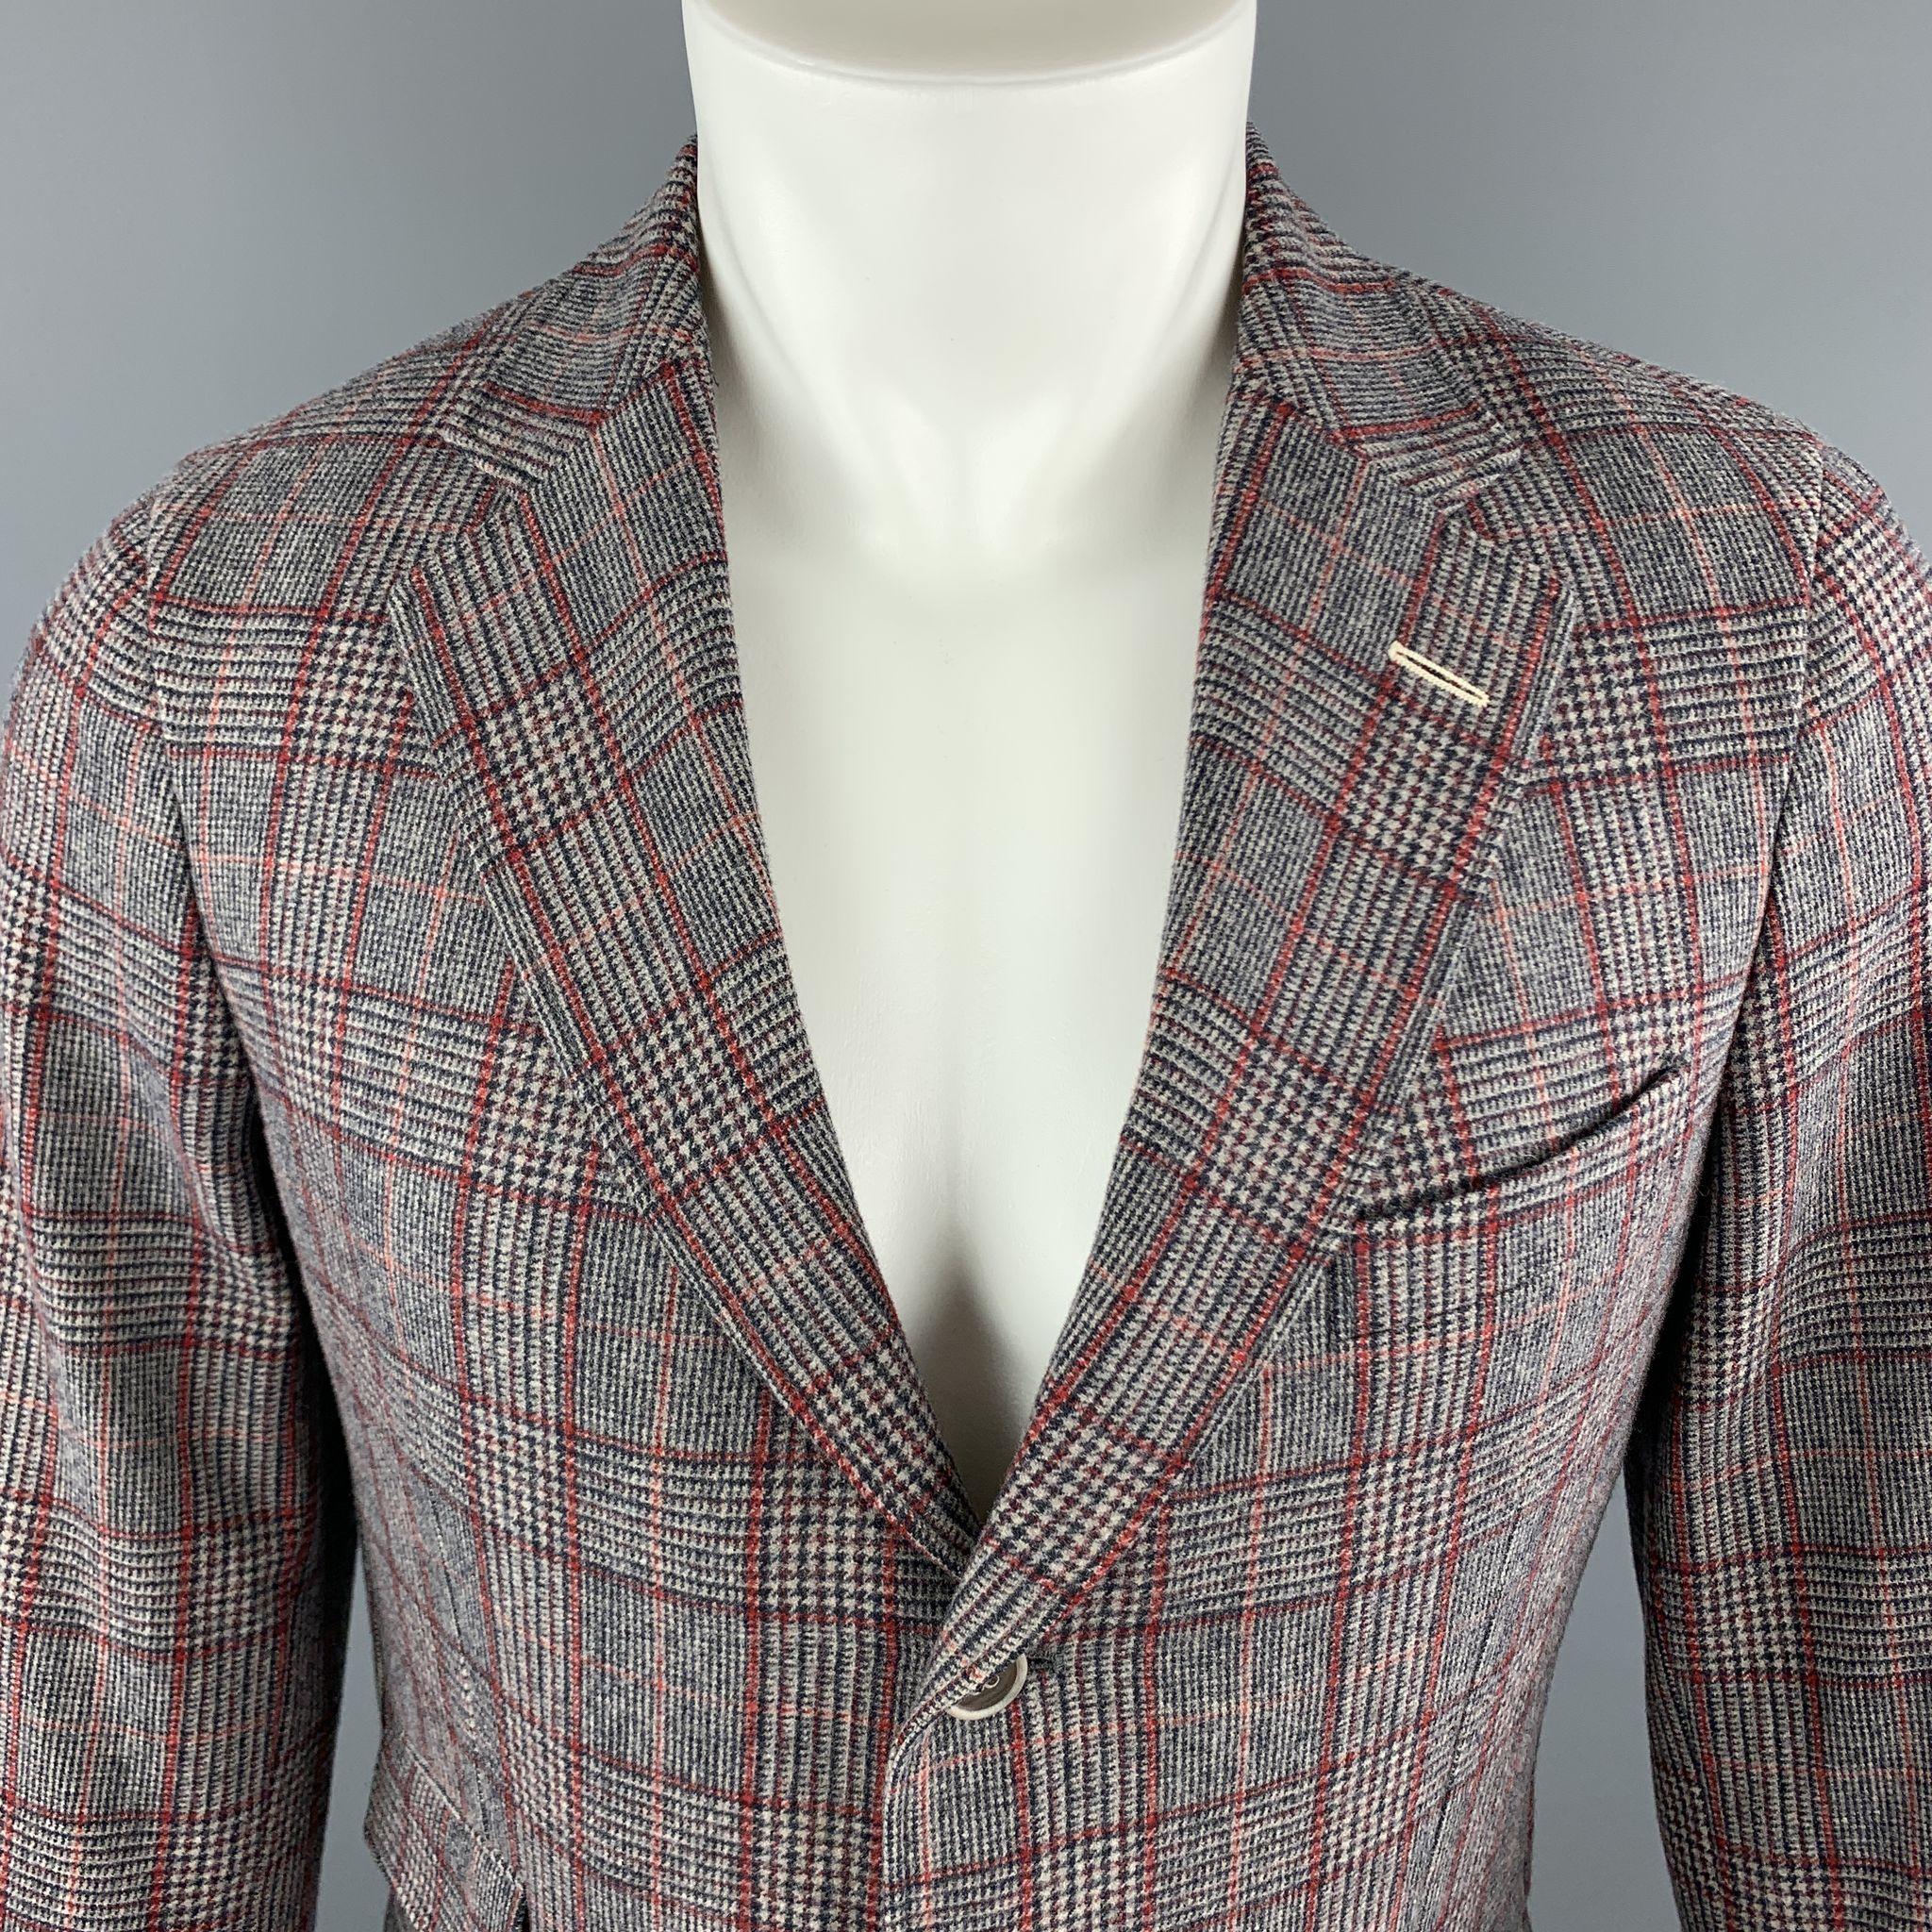 GANT RUGGER Sport Coat comes in a gray and red plaid wool material, with a notch lapel, slit and flap pockets, single breasted, functional buttons at cuffs, a double vent at back, unlined. Made in Portugal. 

Excellent Pre-Owned Condition.
Marked: